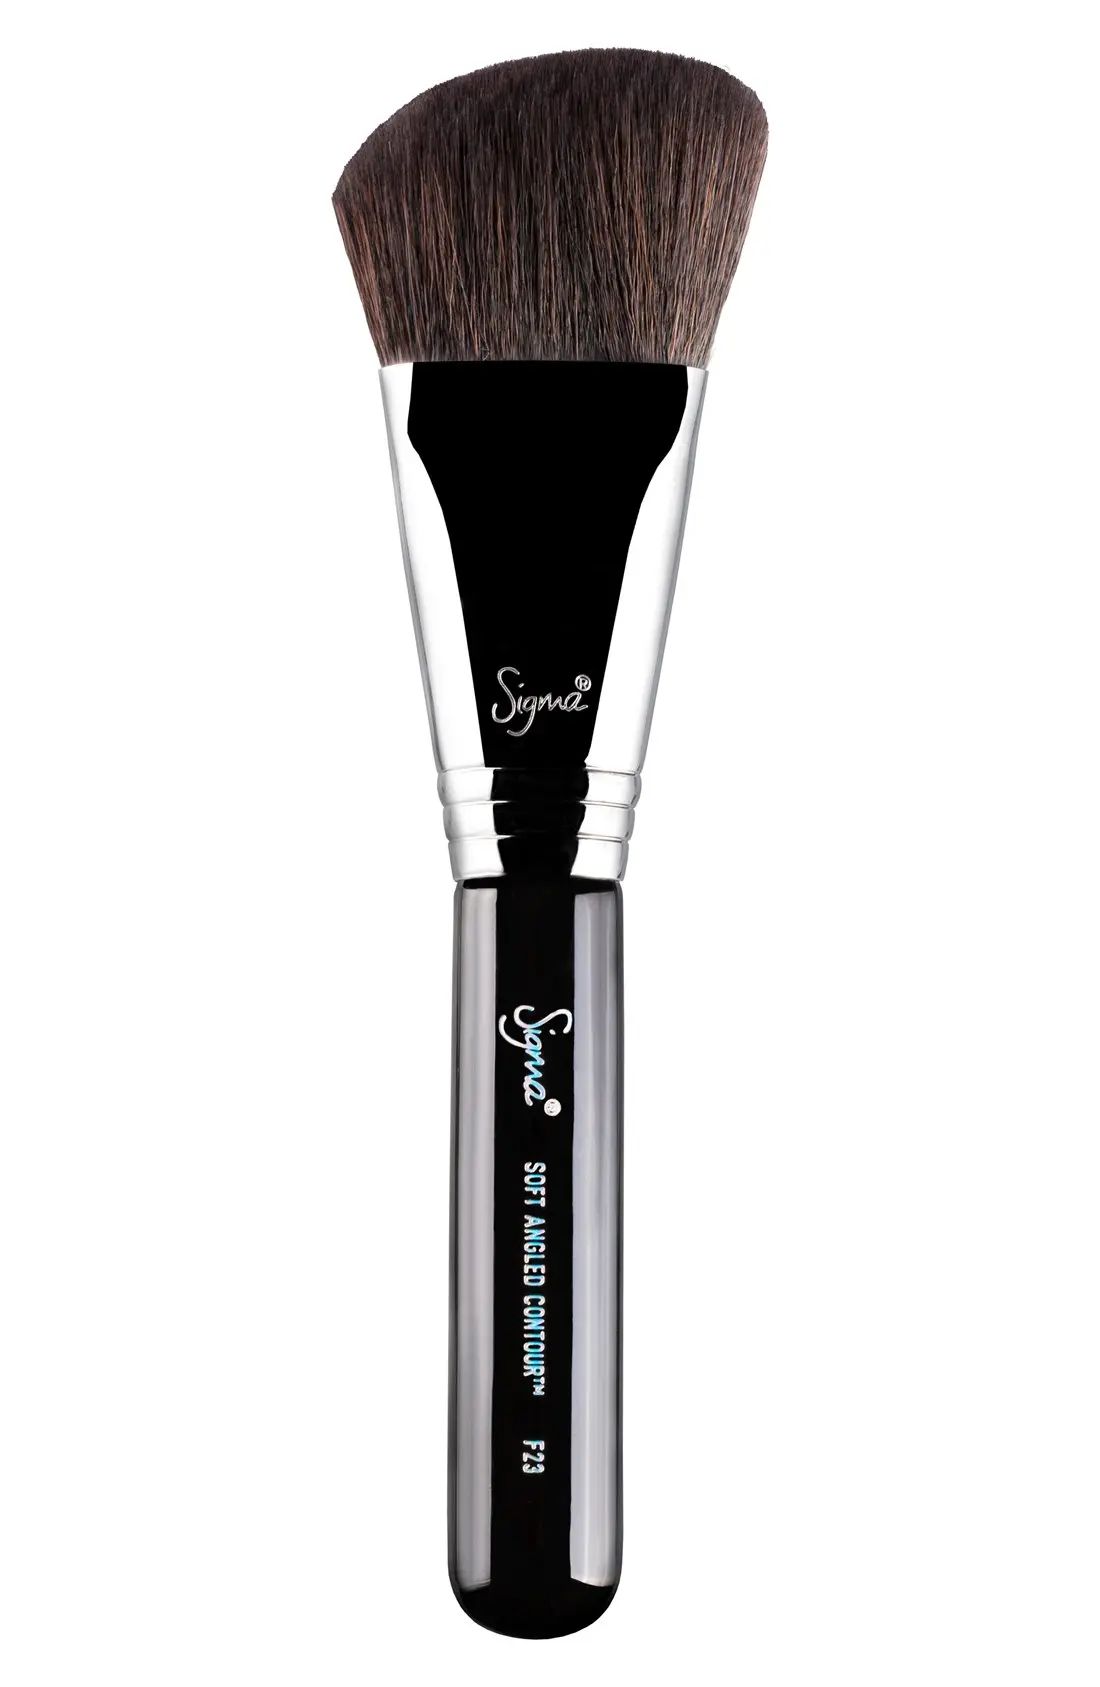 Sigma Beauty F23 Soft Angled Contour(TM) Brush, Size One Size - No Color | Nordstrom